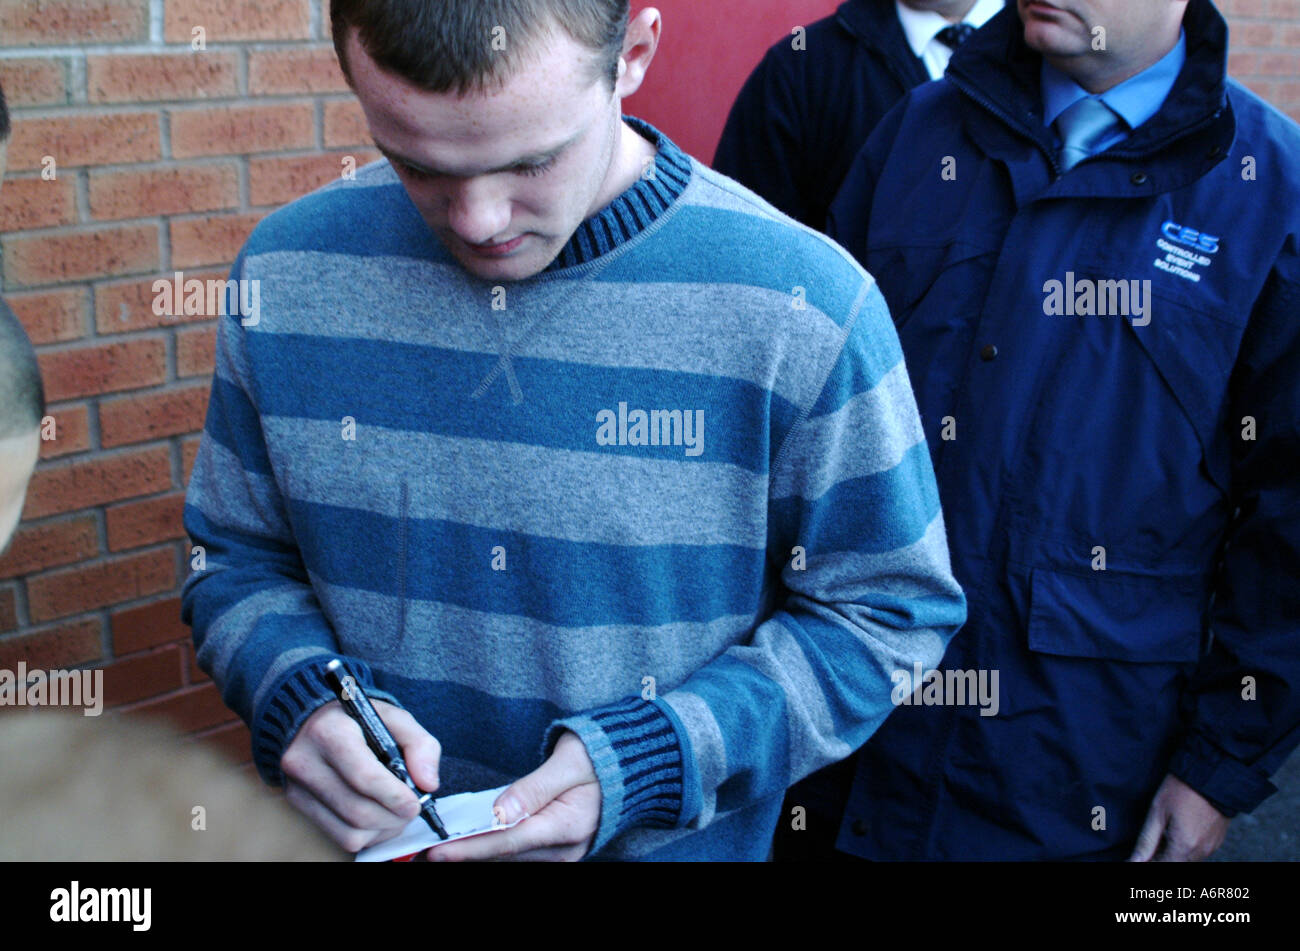 Wayne Rooney Signing Autographs outside Old Trafford Stock Photo